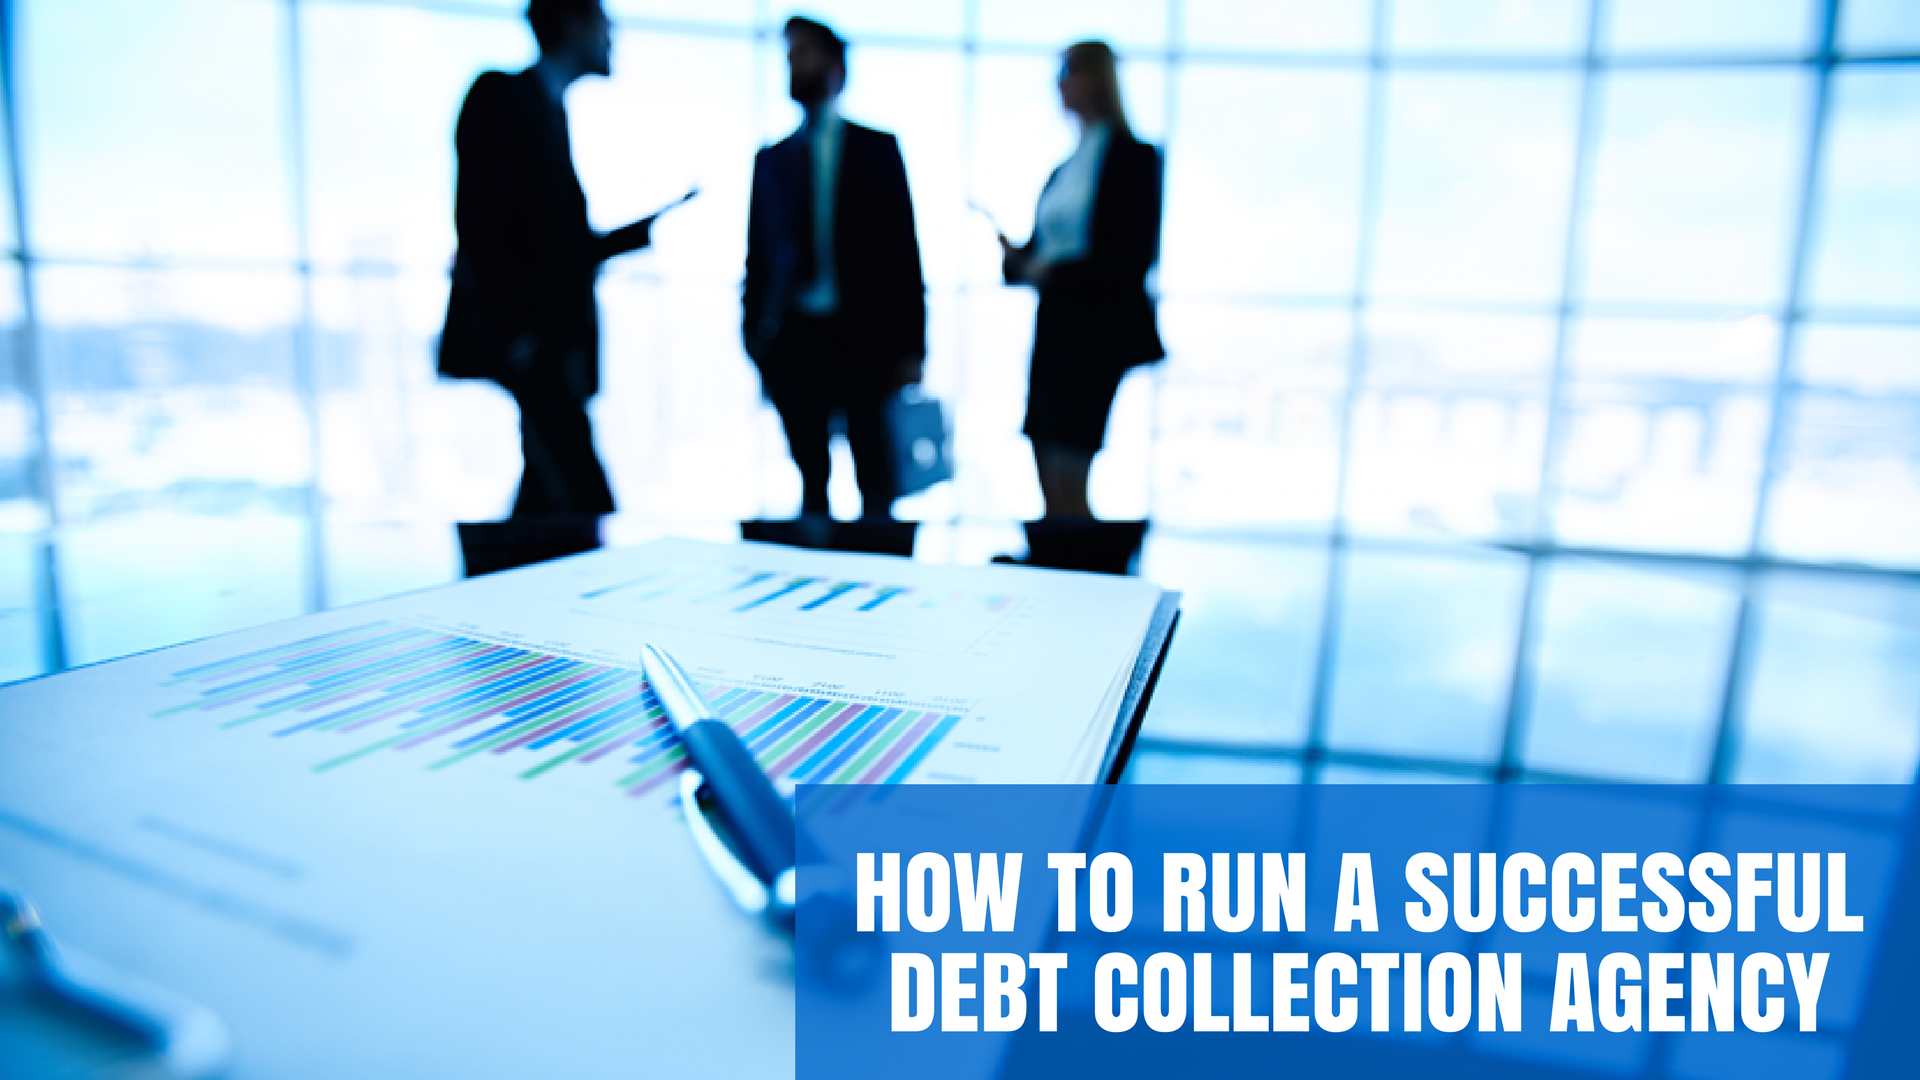 How To Run a Successful Debt Collection Agency